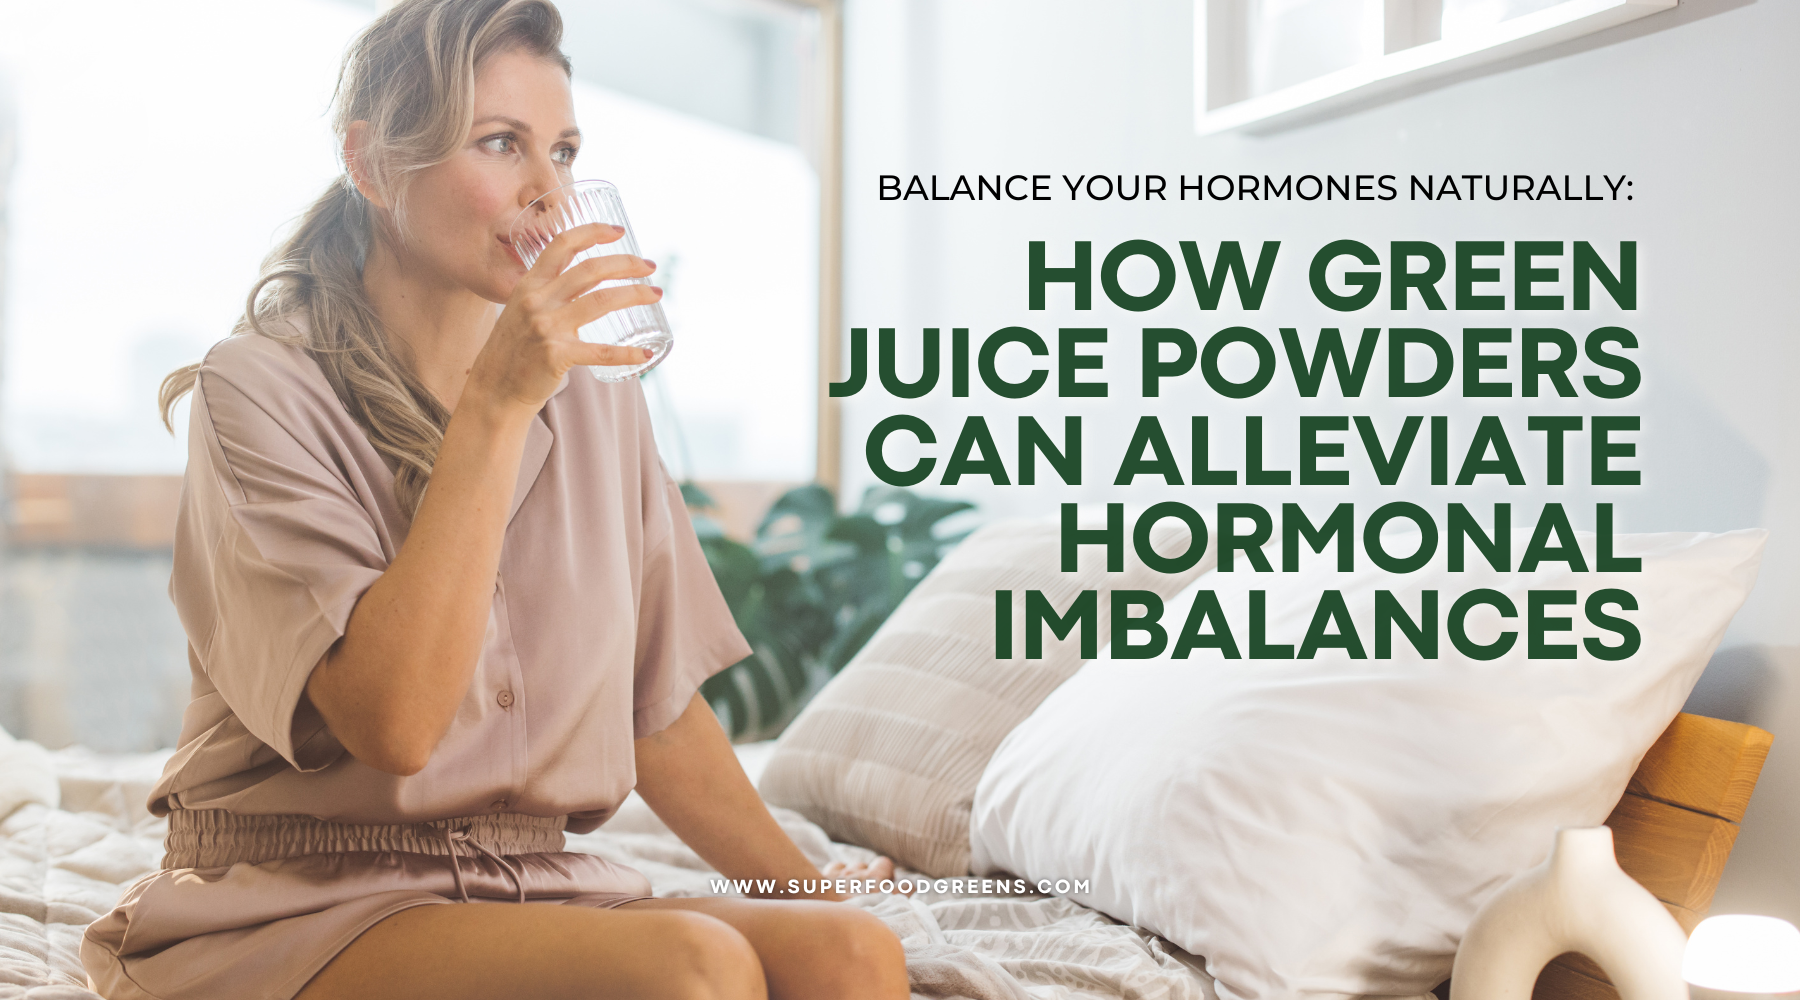 11 Natural Ways to Balance Hormones and Reduce Inflammation | Superfoodsgreen